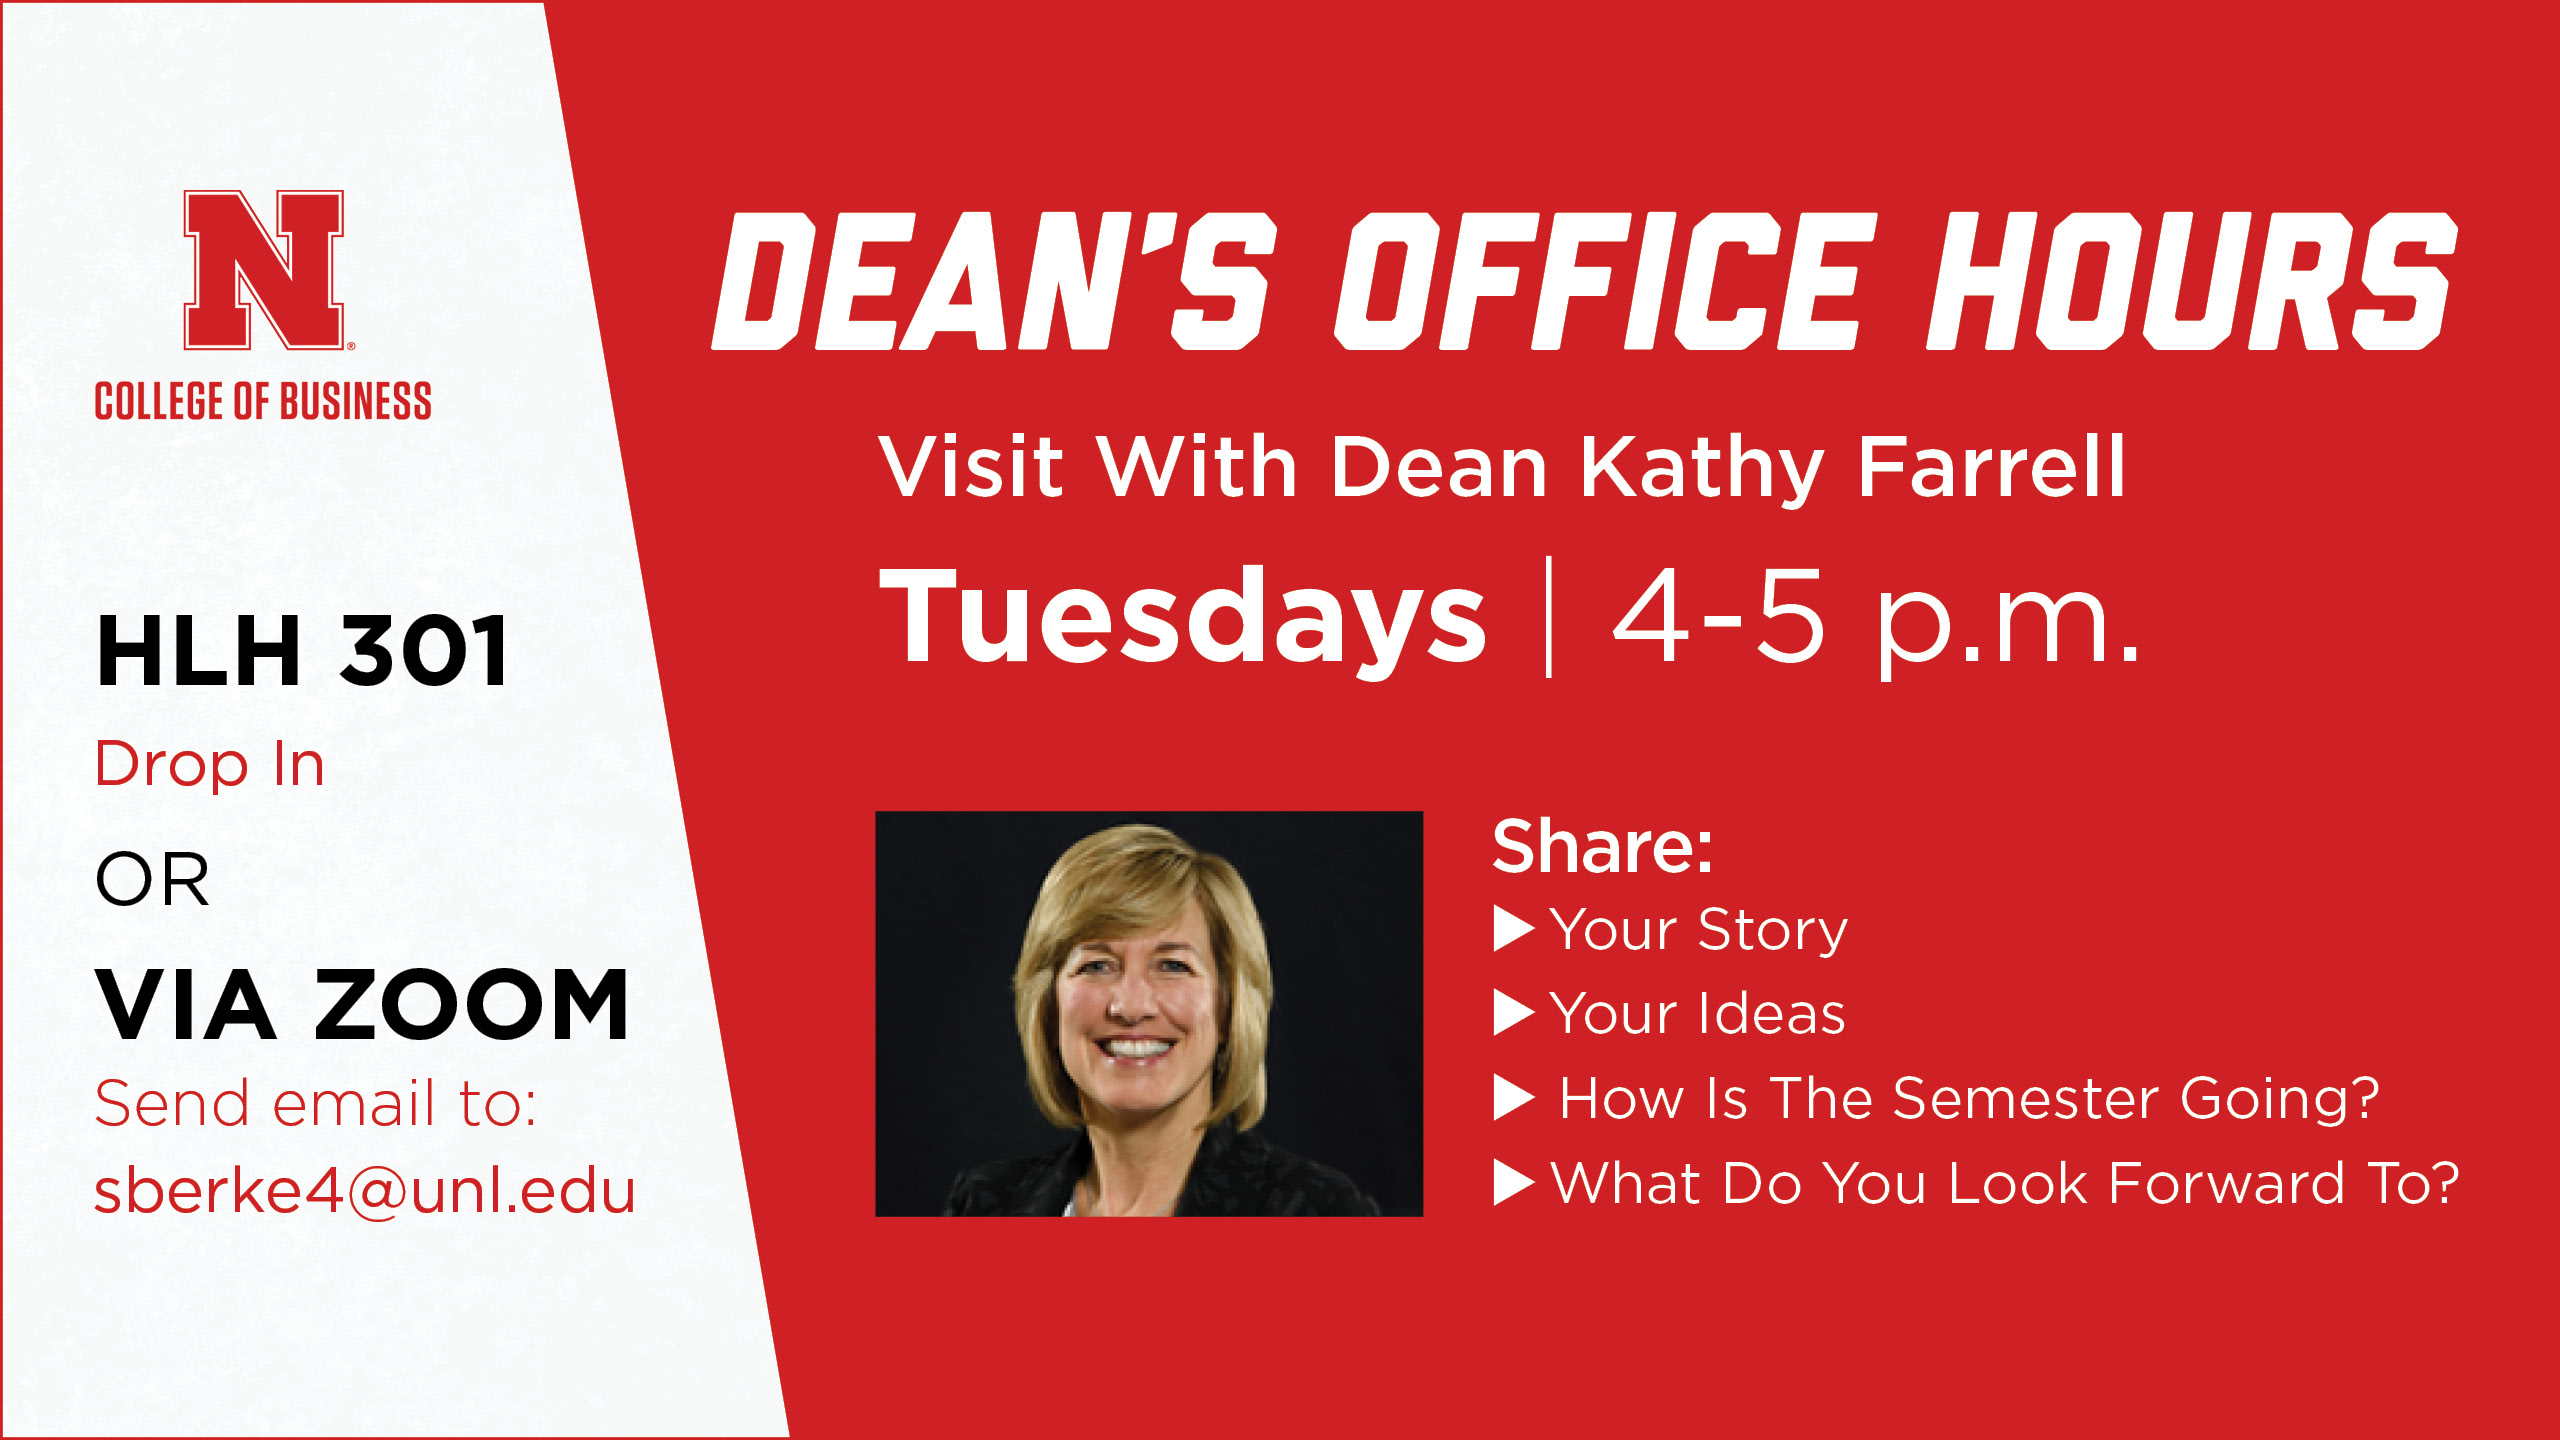 Dean's office hours | HLH 301 | Or via zoom